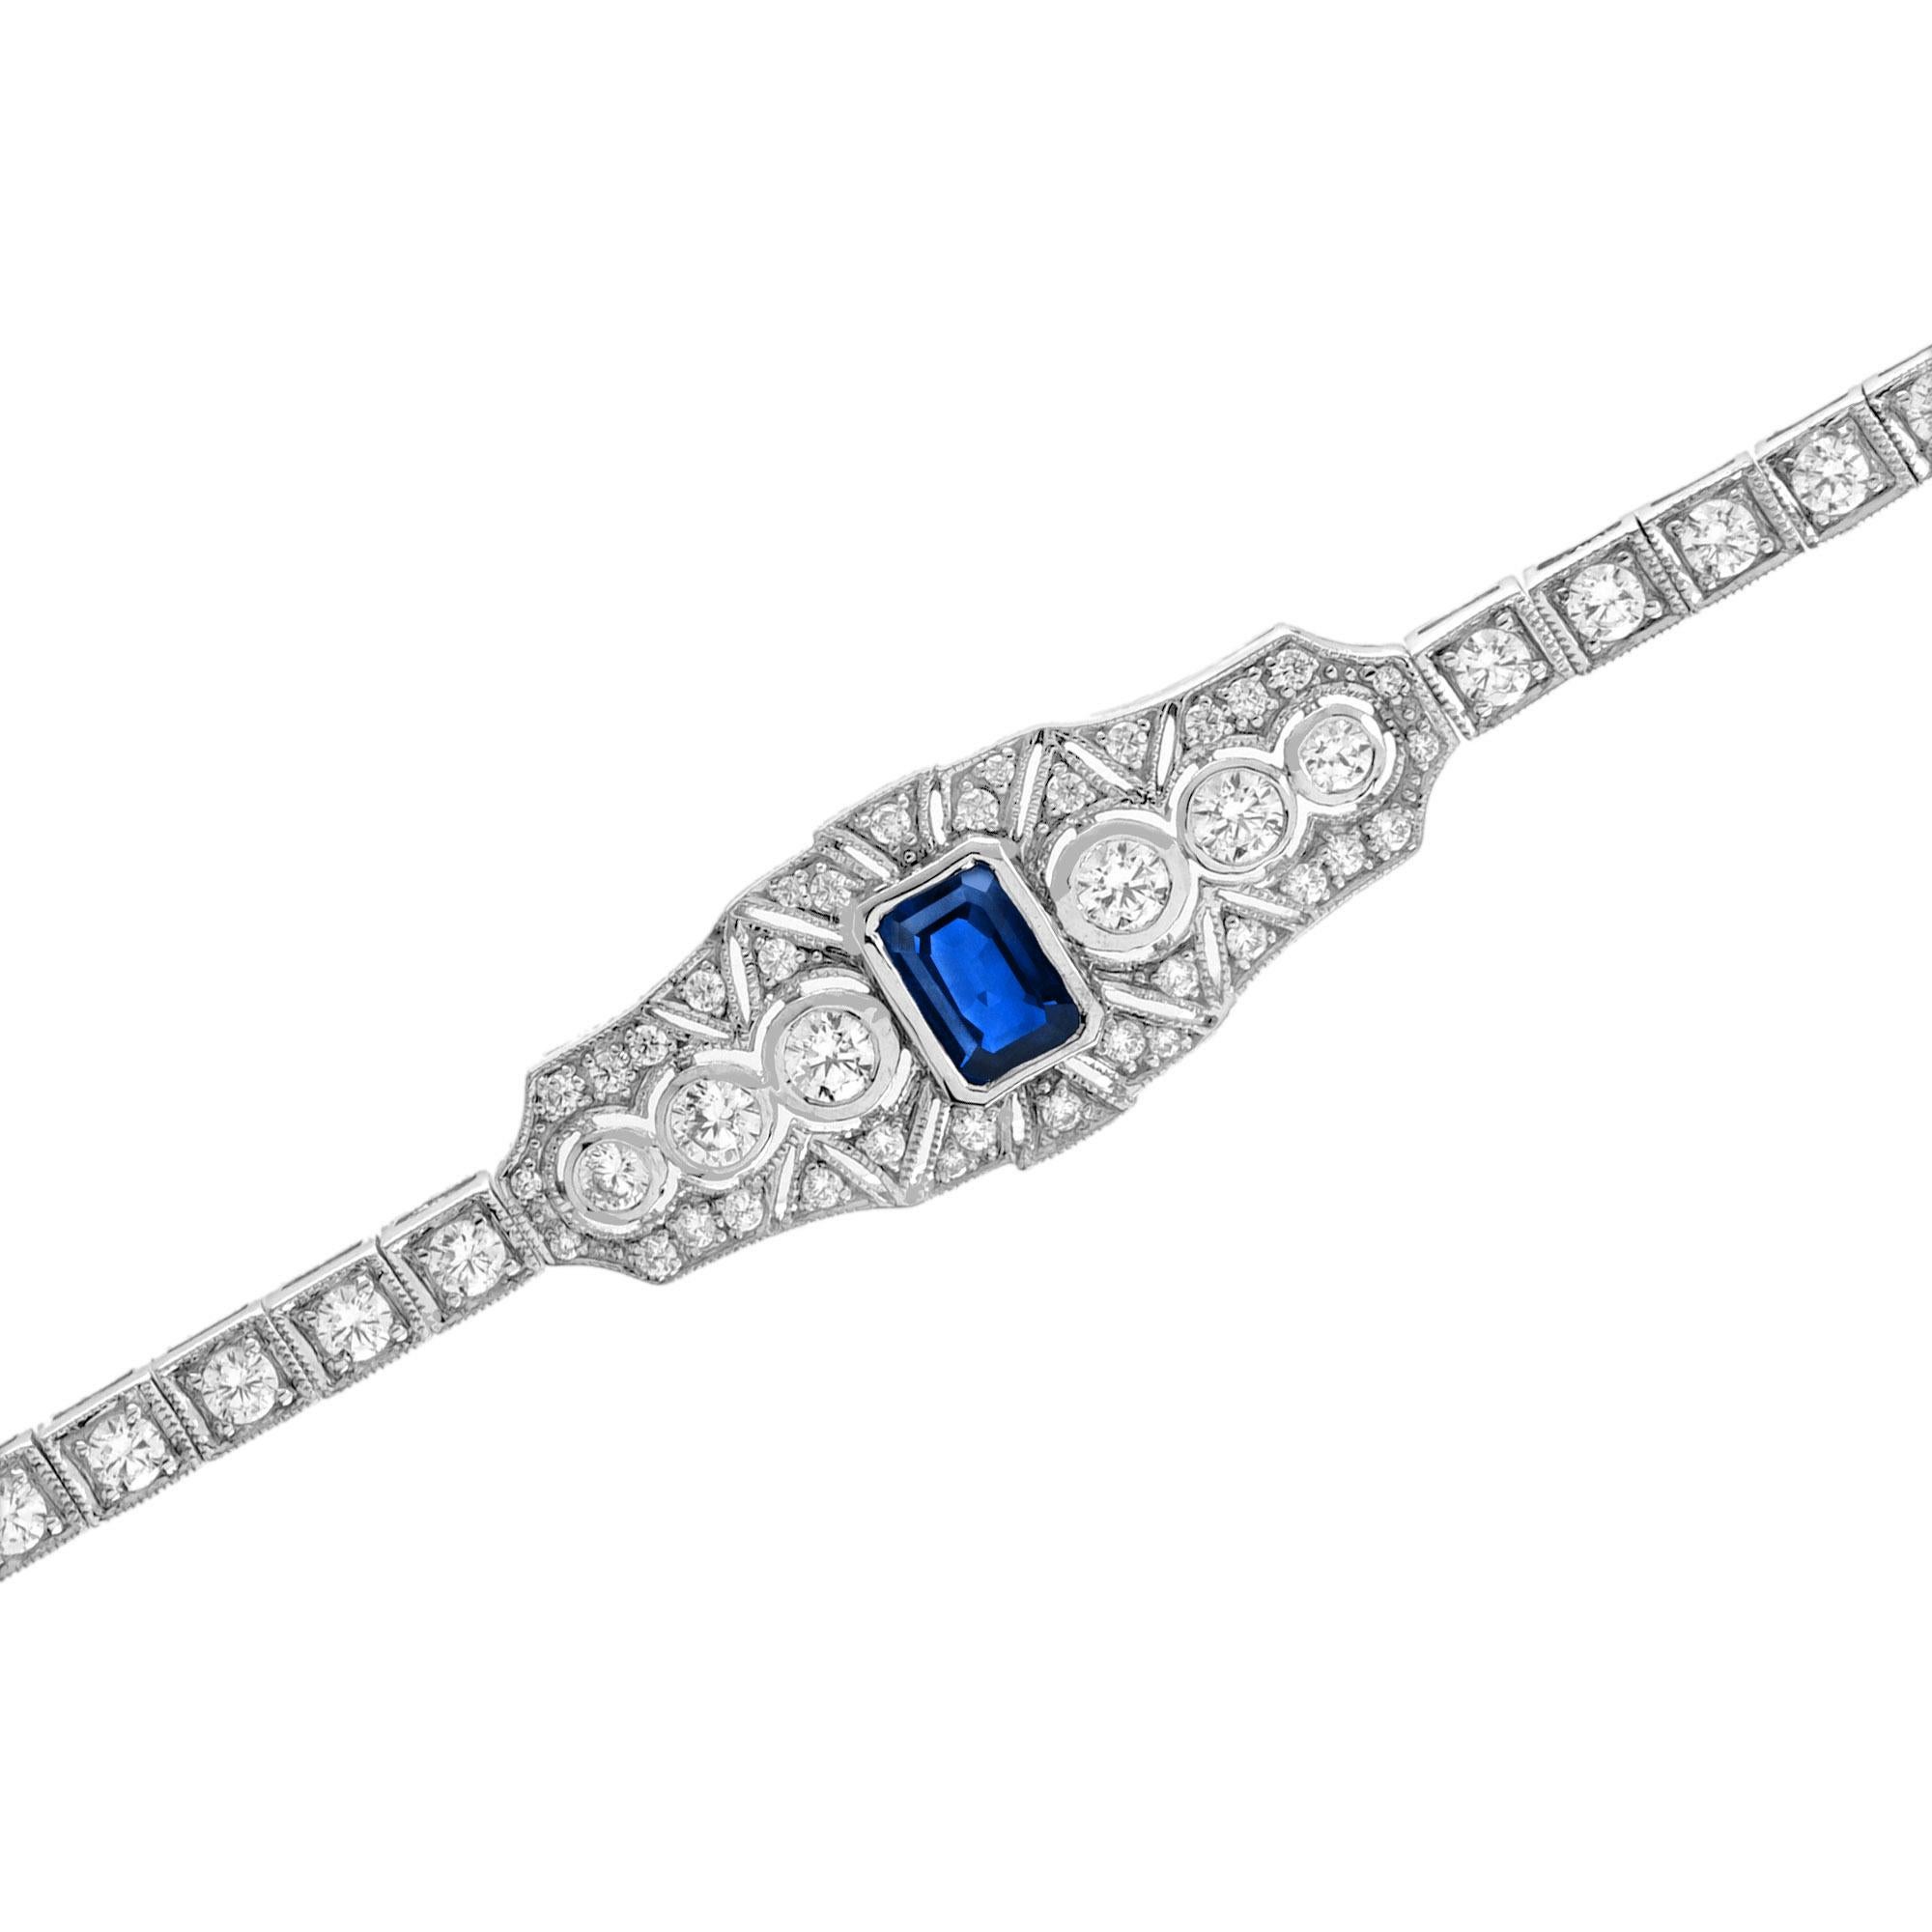 Emerald Cut Blue Sapphire and Diamond Art Deco Style Bracelet in 18K White Gold For Sale